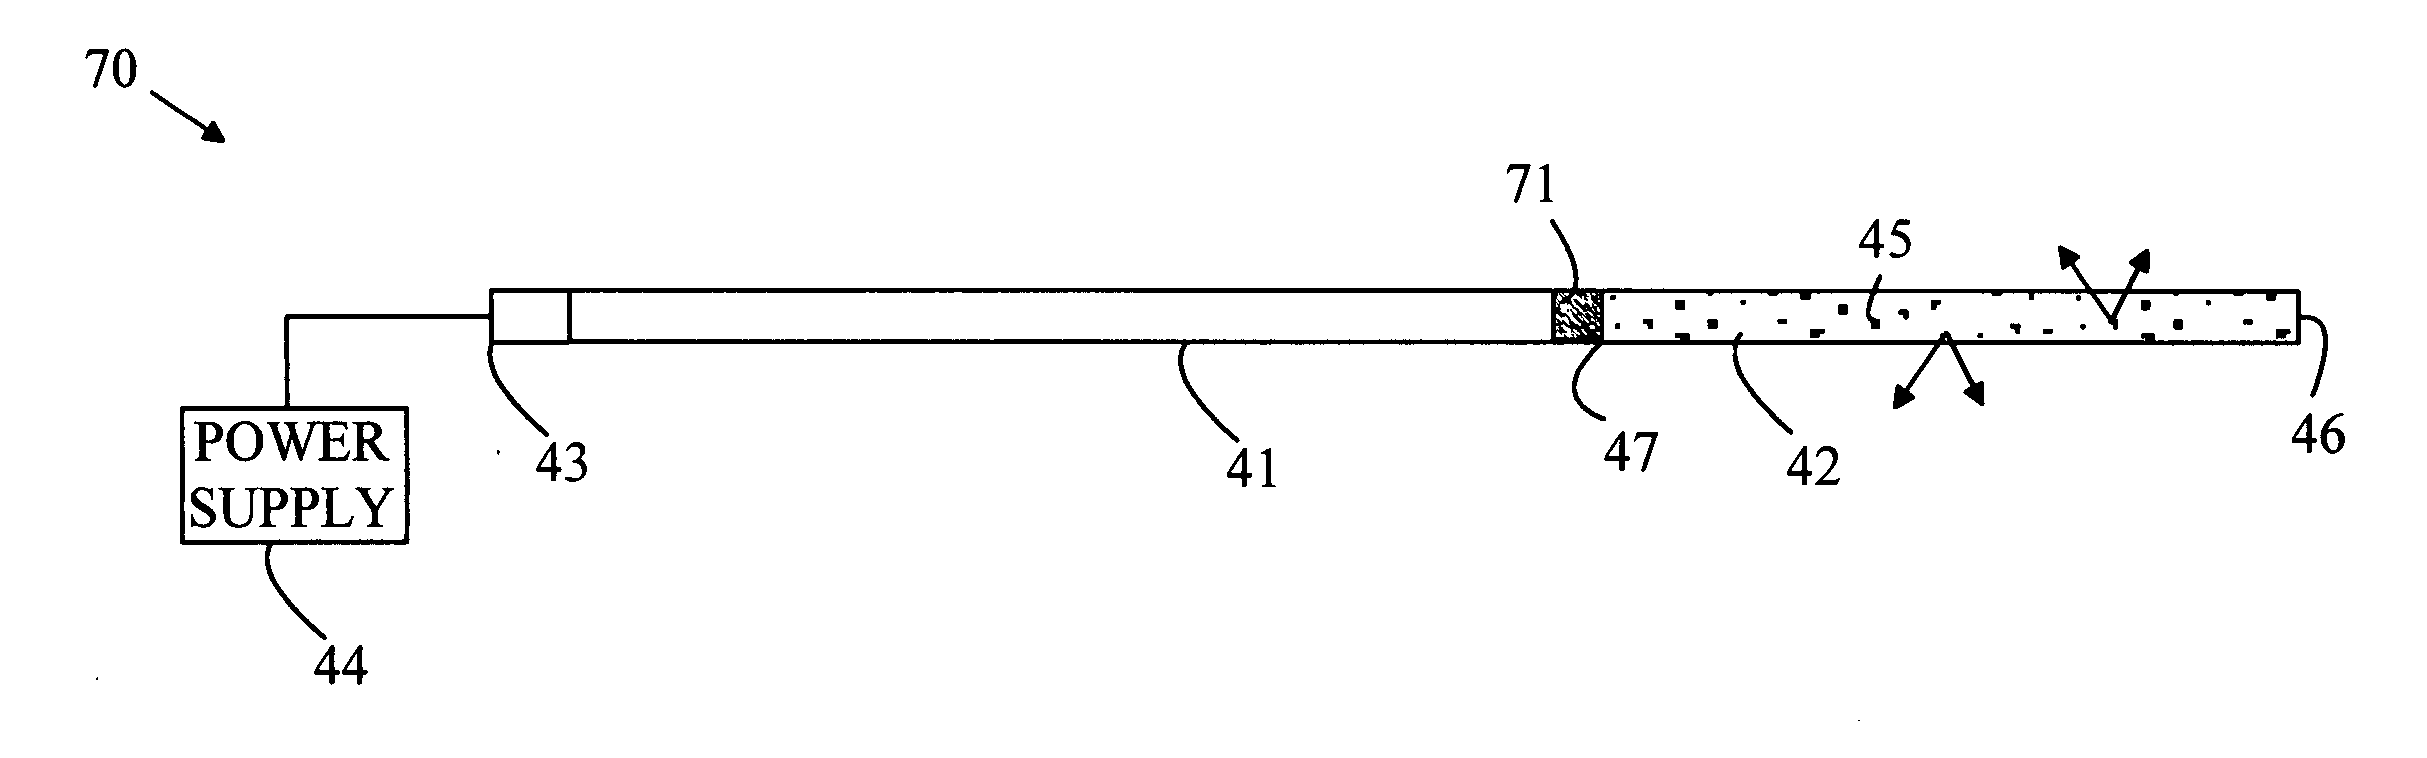 Solid state light source adapted for remote illumination